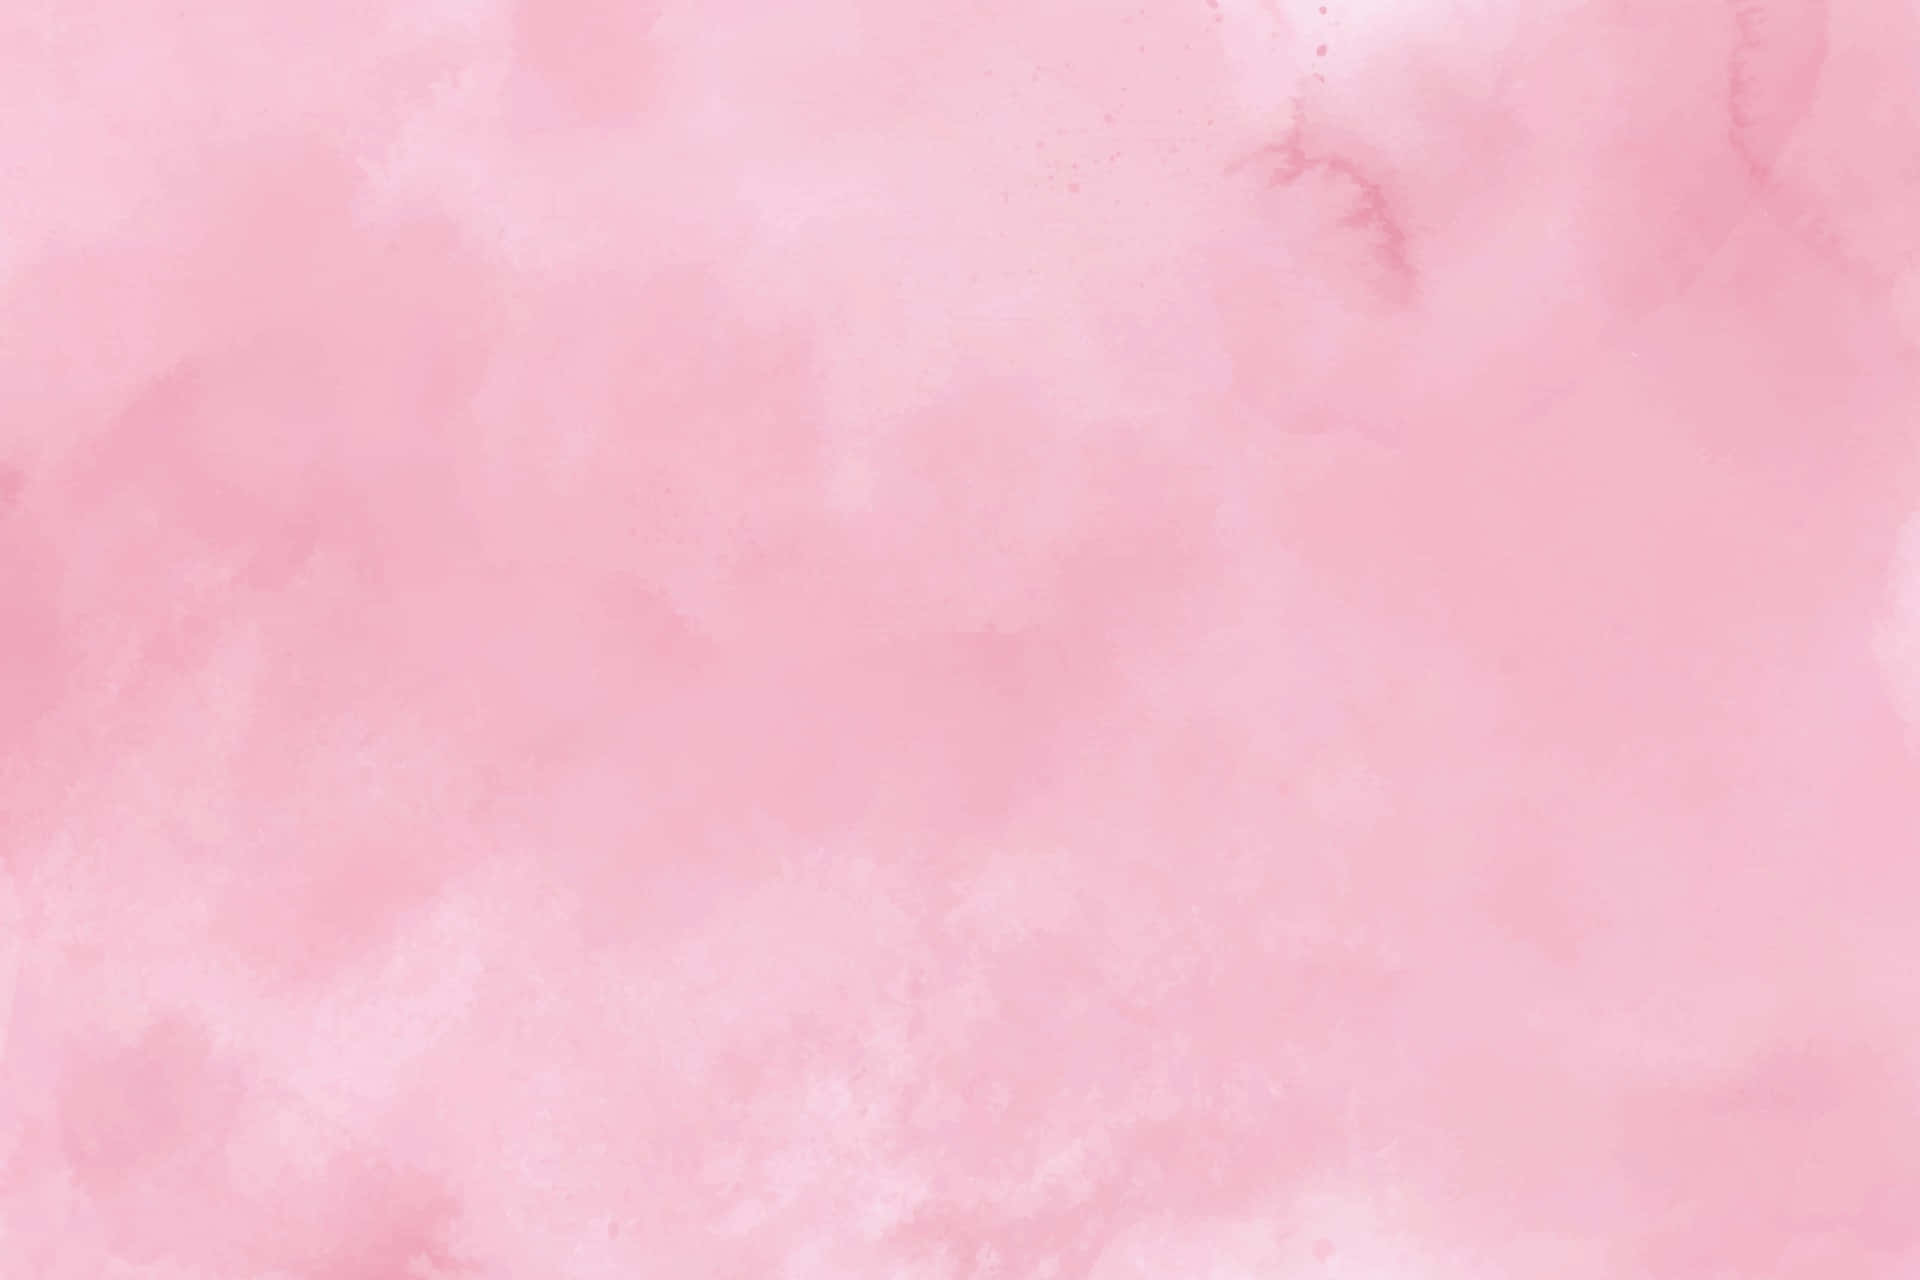 Dreamy Pink Watercolor Background